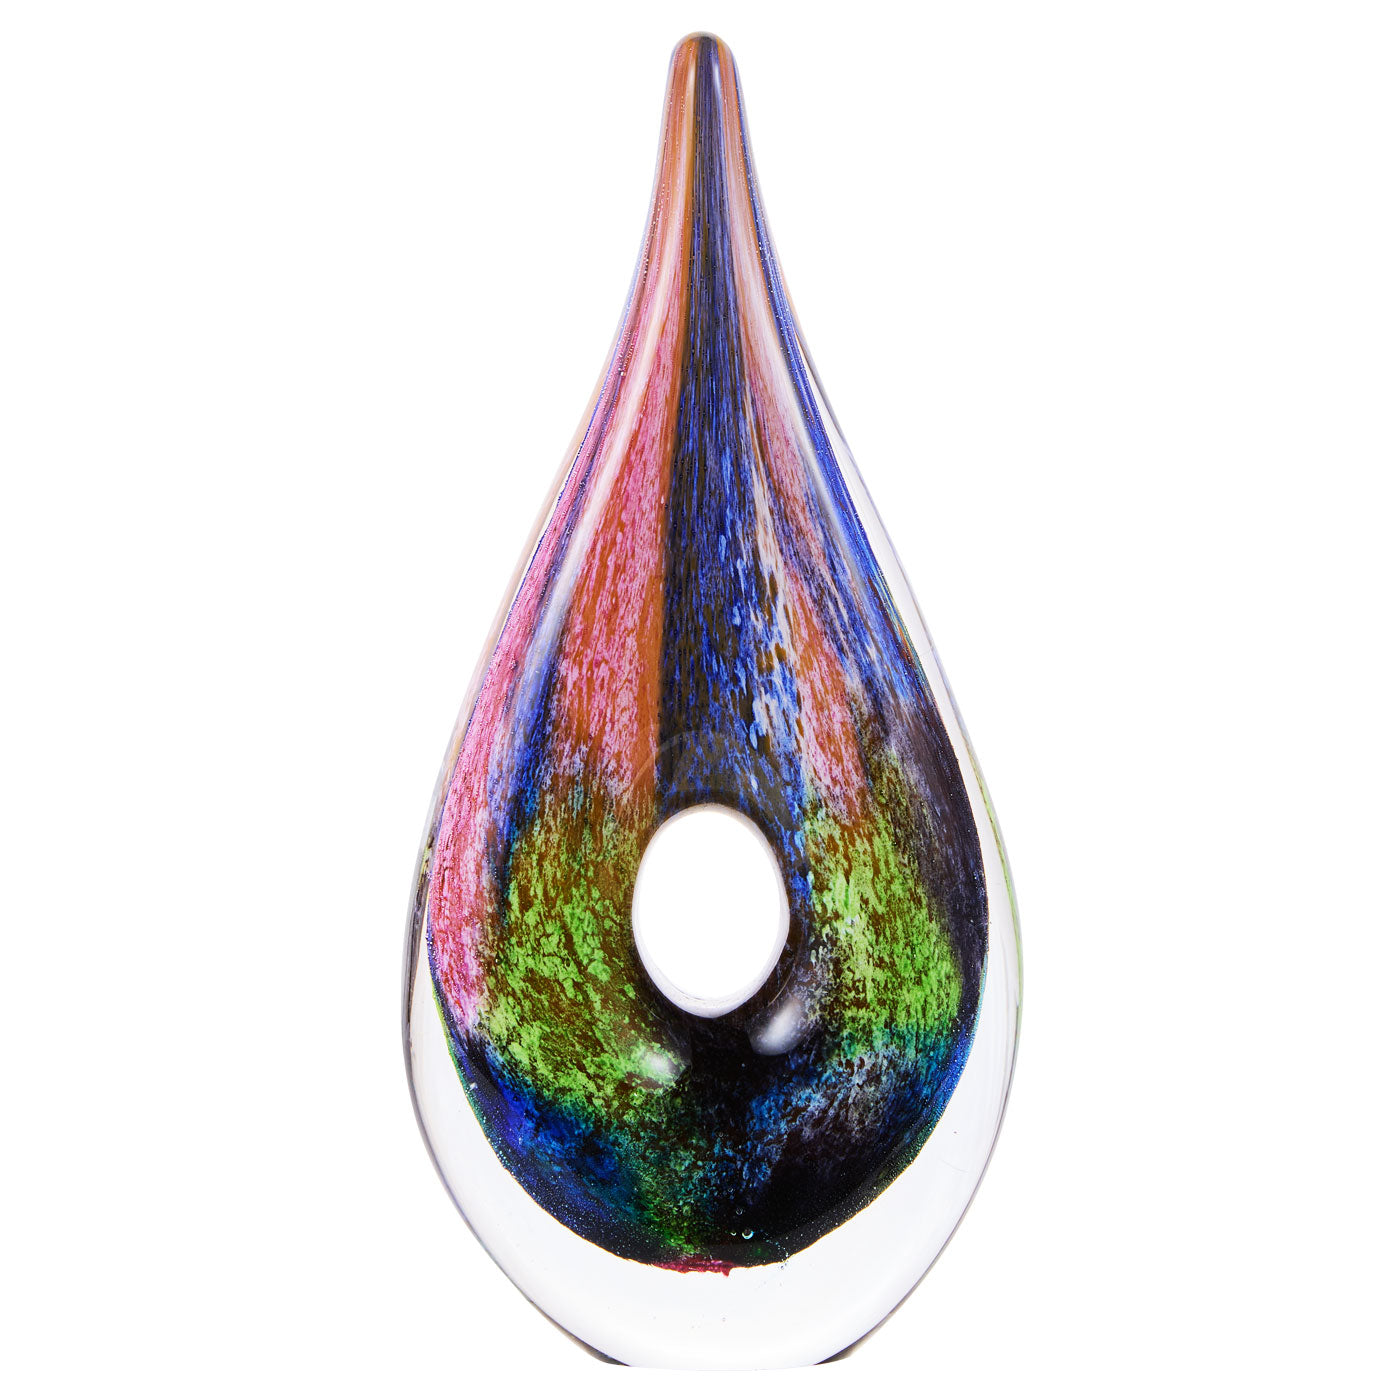 Luxury Lane Hand Blown Abstract Hollow Tear Drop Sommerso Art Glass Sculpture 8.5 inch tall